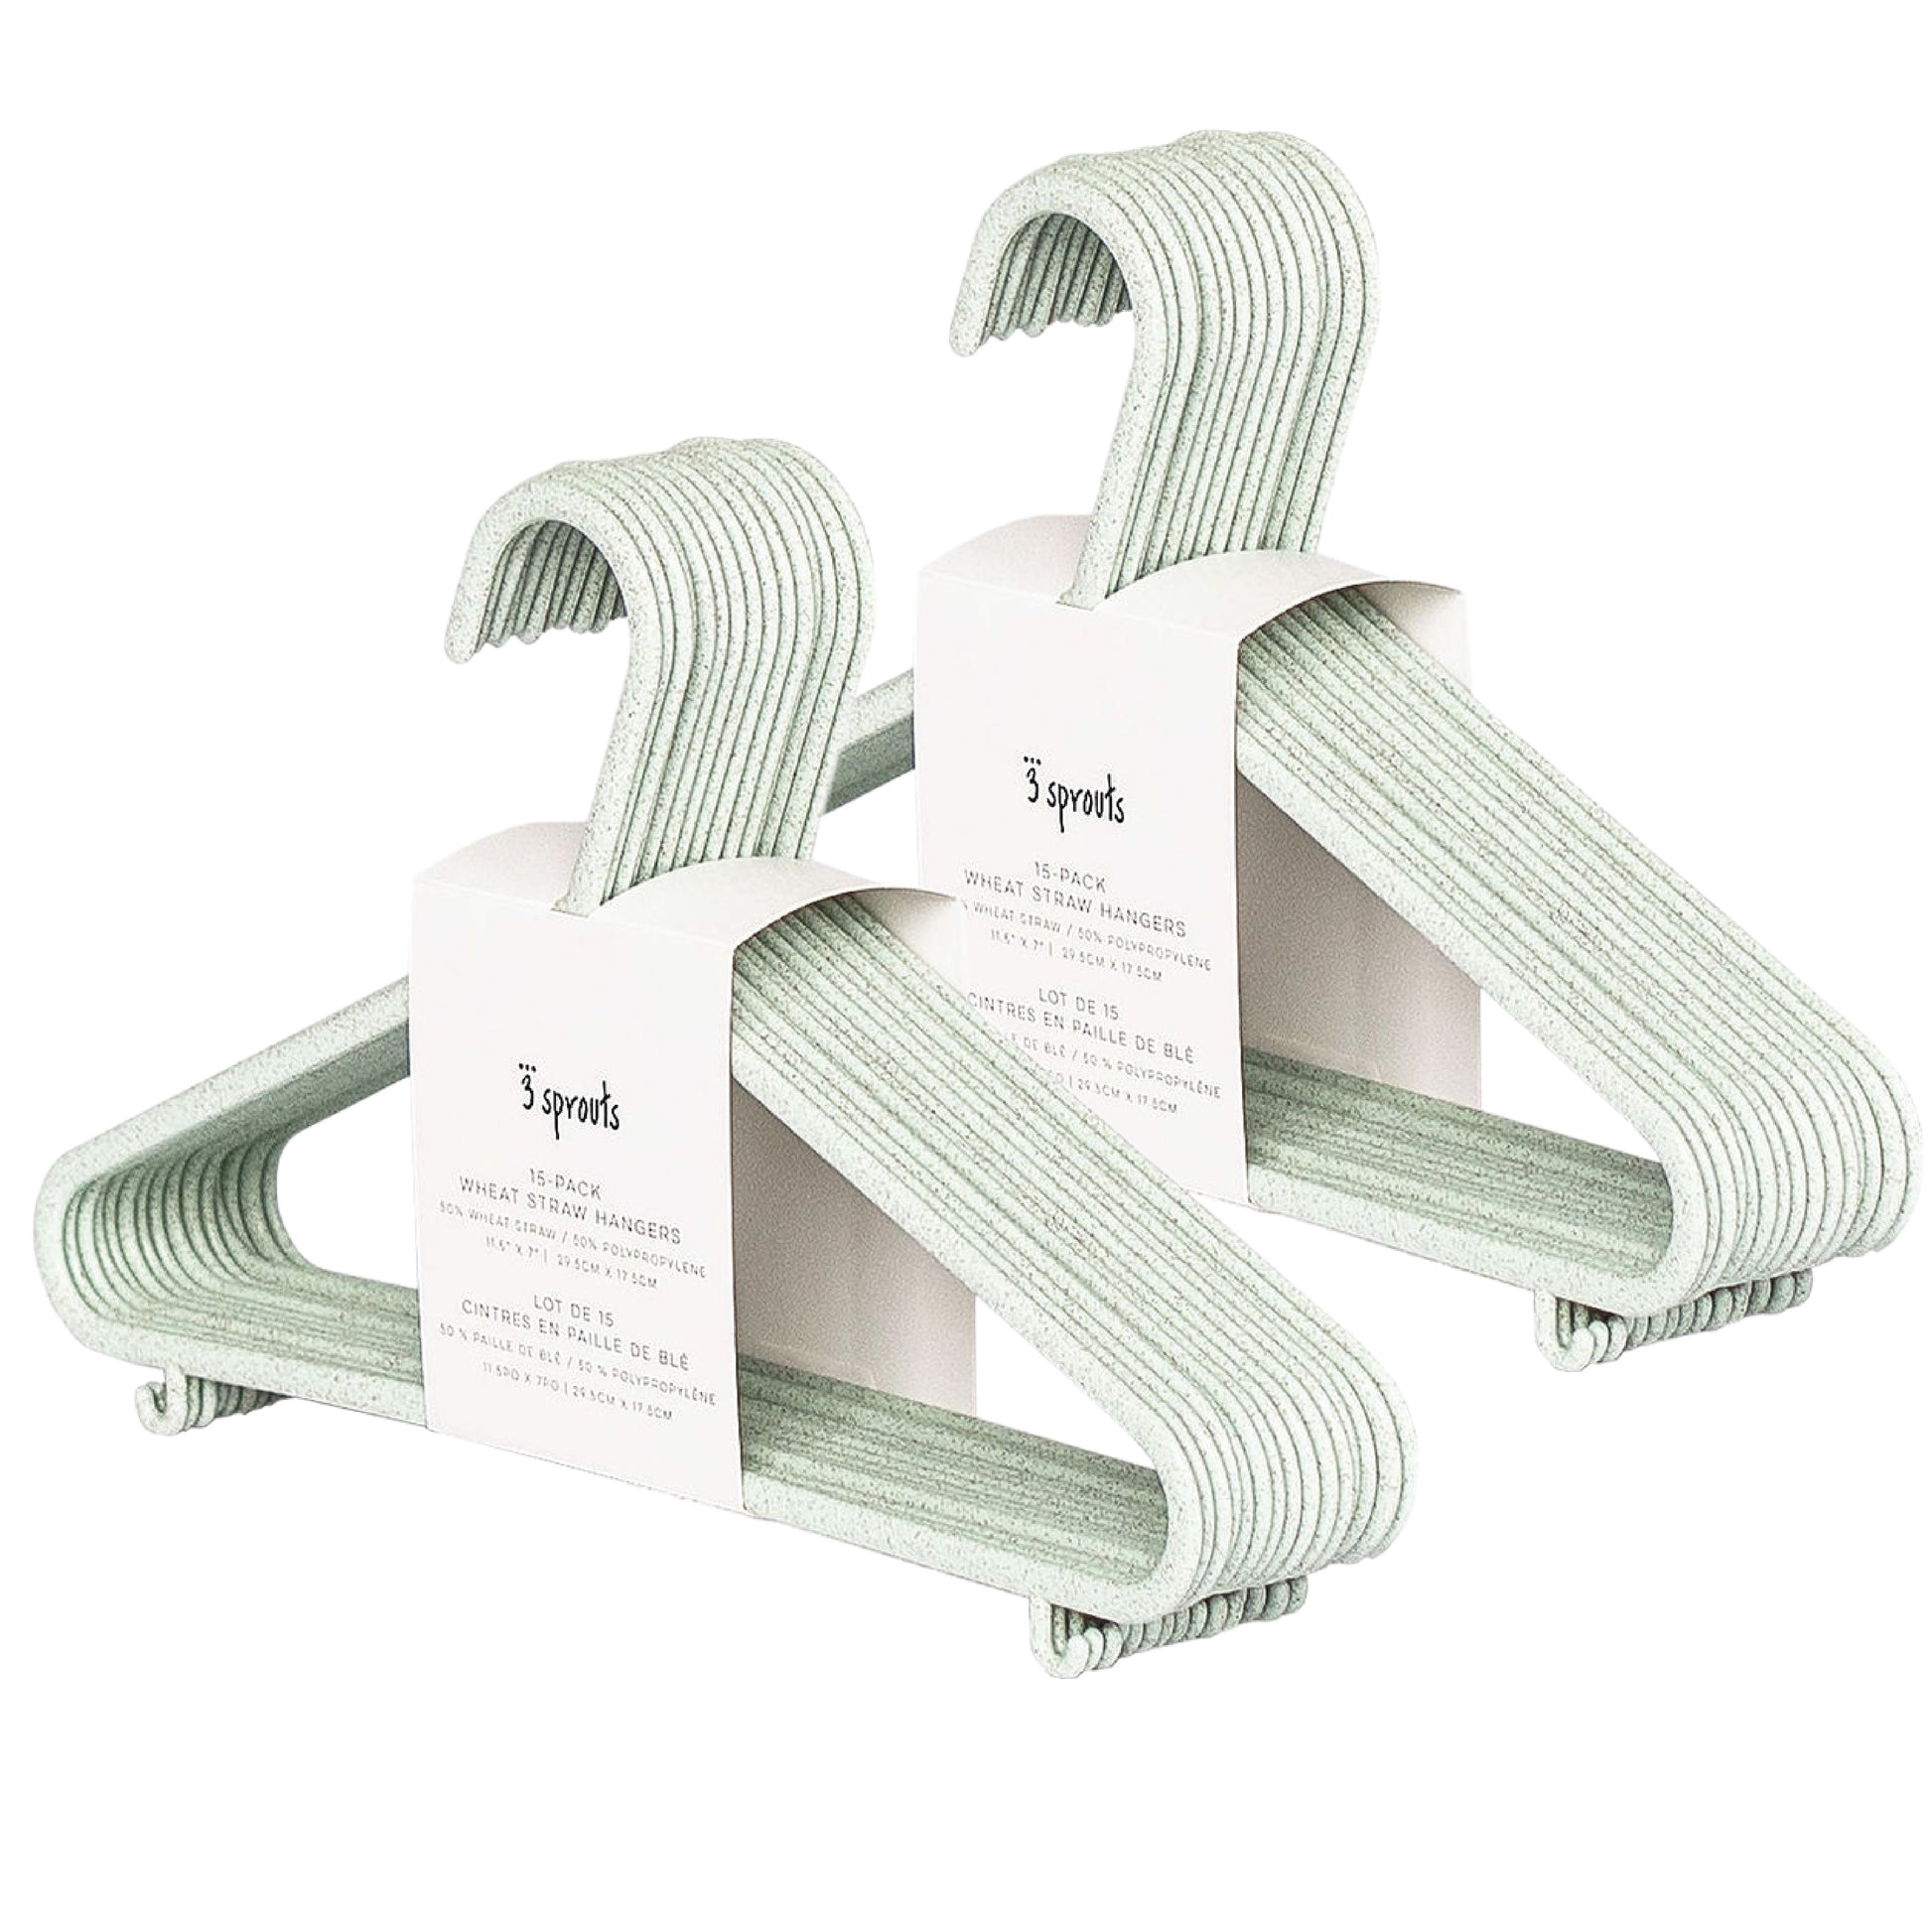 https://www.3sprouts.com/cdn/shop/products/HWGRN-15_3Sprouts_Wheat_Straw_Hangers_Green_1large_30pk.jpg?v=1674577614&width=1946